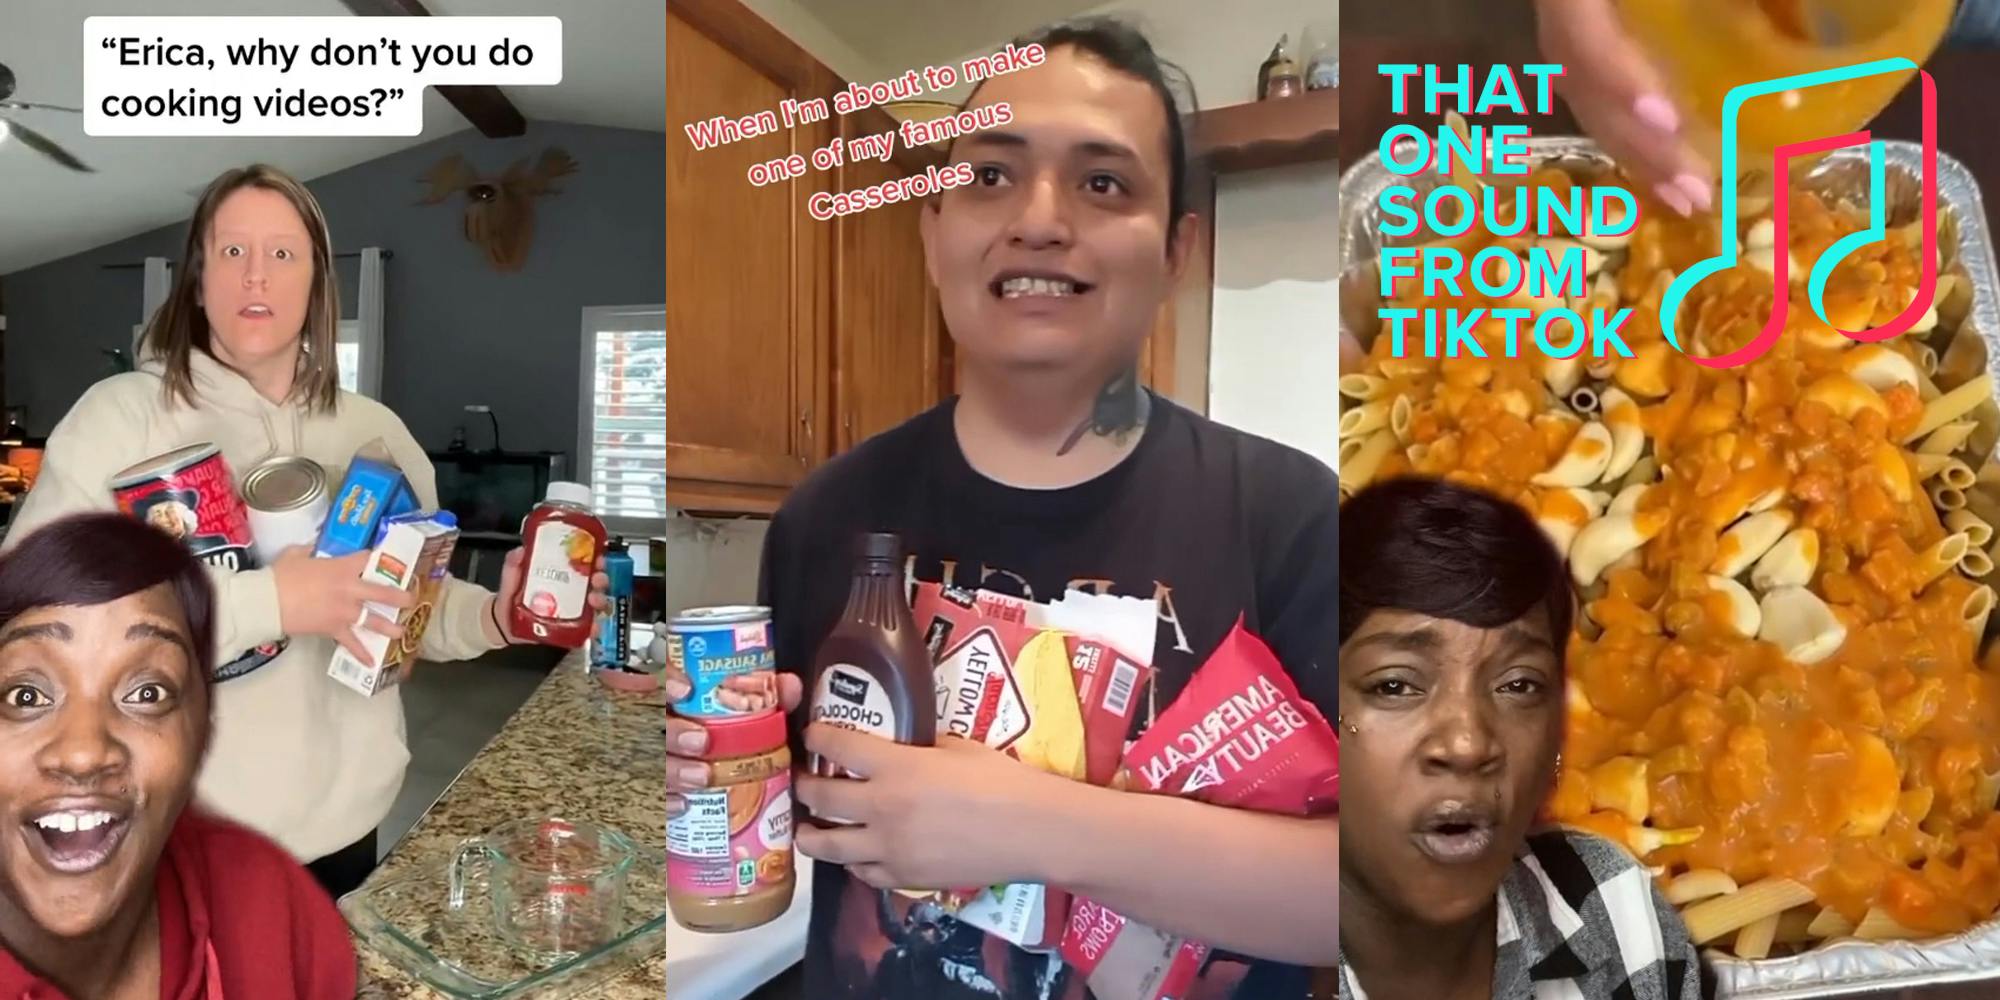 woman greenscreen TikTok over TikToker making food with caption ""Erica, why don't you do cooking videos?"" (l) person holding ingredients with caption "When I'm about to make one of my famous casseroles" (c) woman greenscreen TikTok over food TikTok with That One Sound From TikTok logo in top right corner (r)